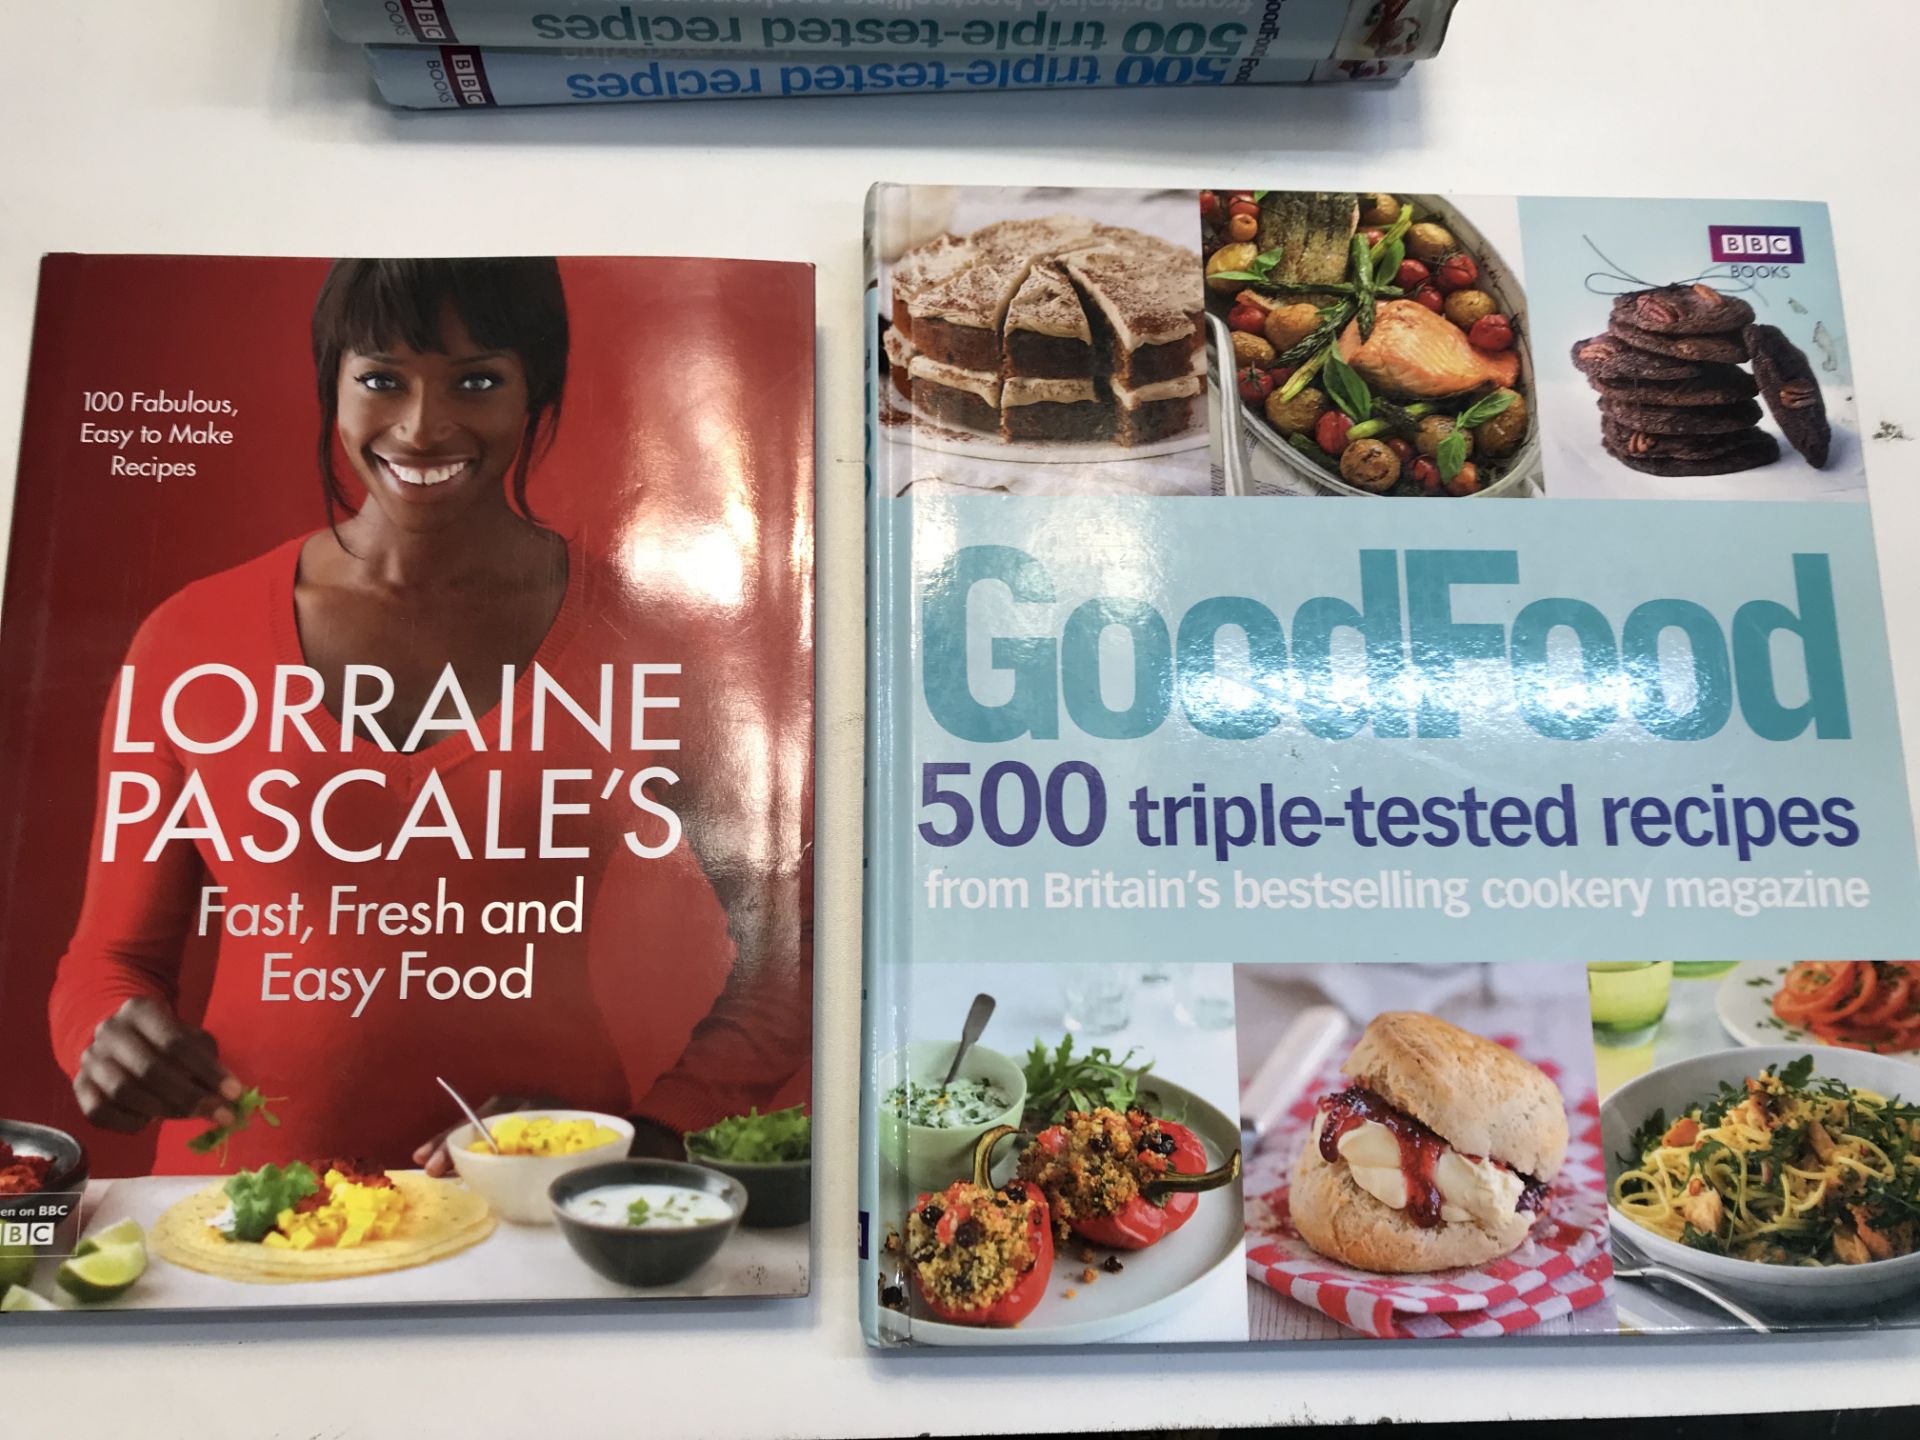 16 x Various cook books |9781849900881, 9780007934829, 9781908449078, 9781785940071 - Image 2 of 4